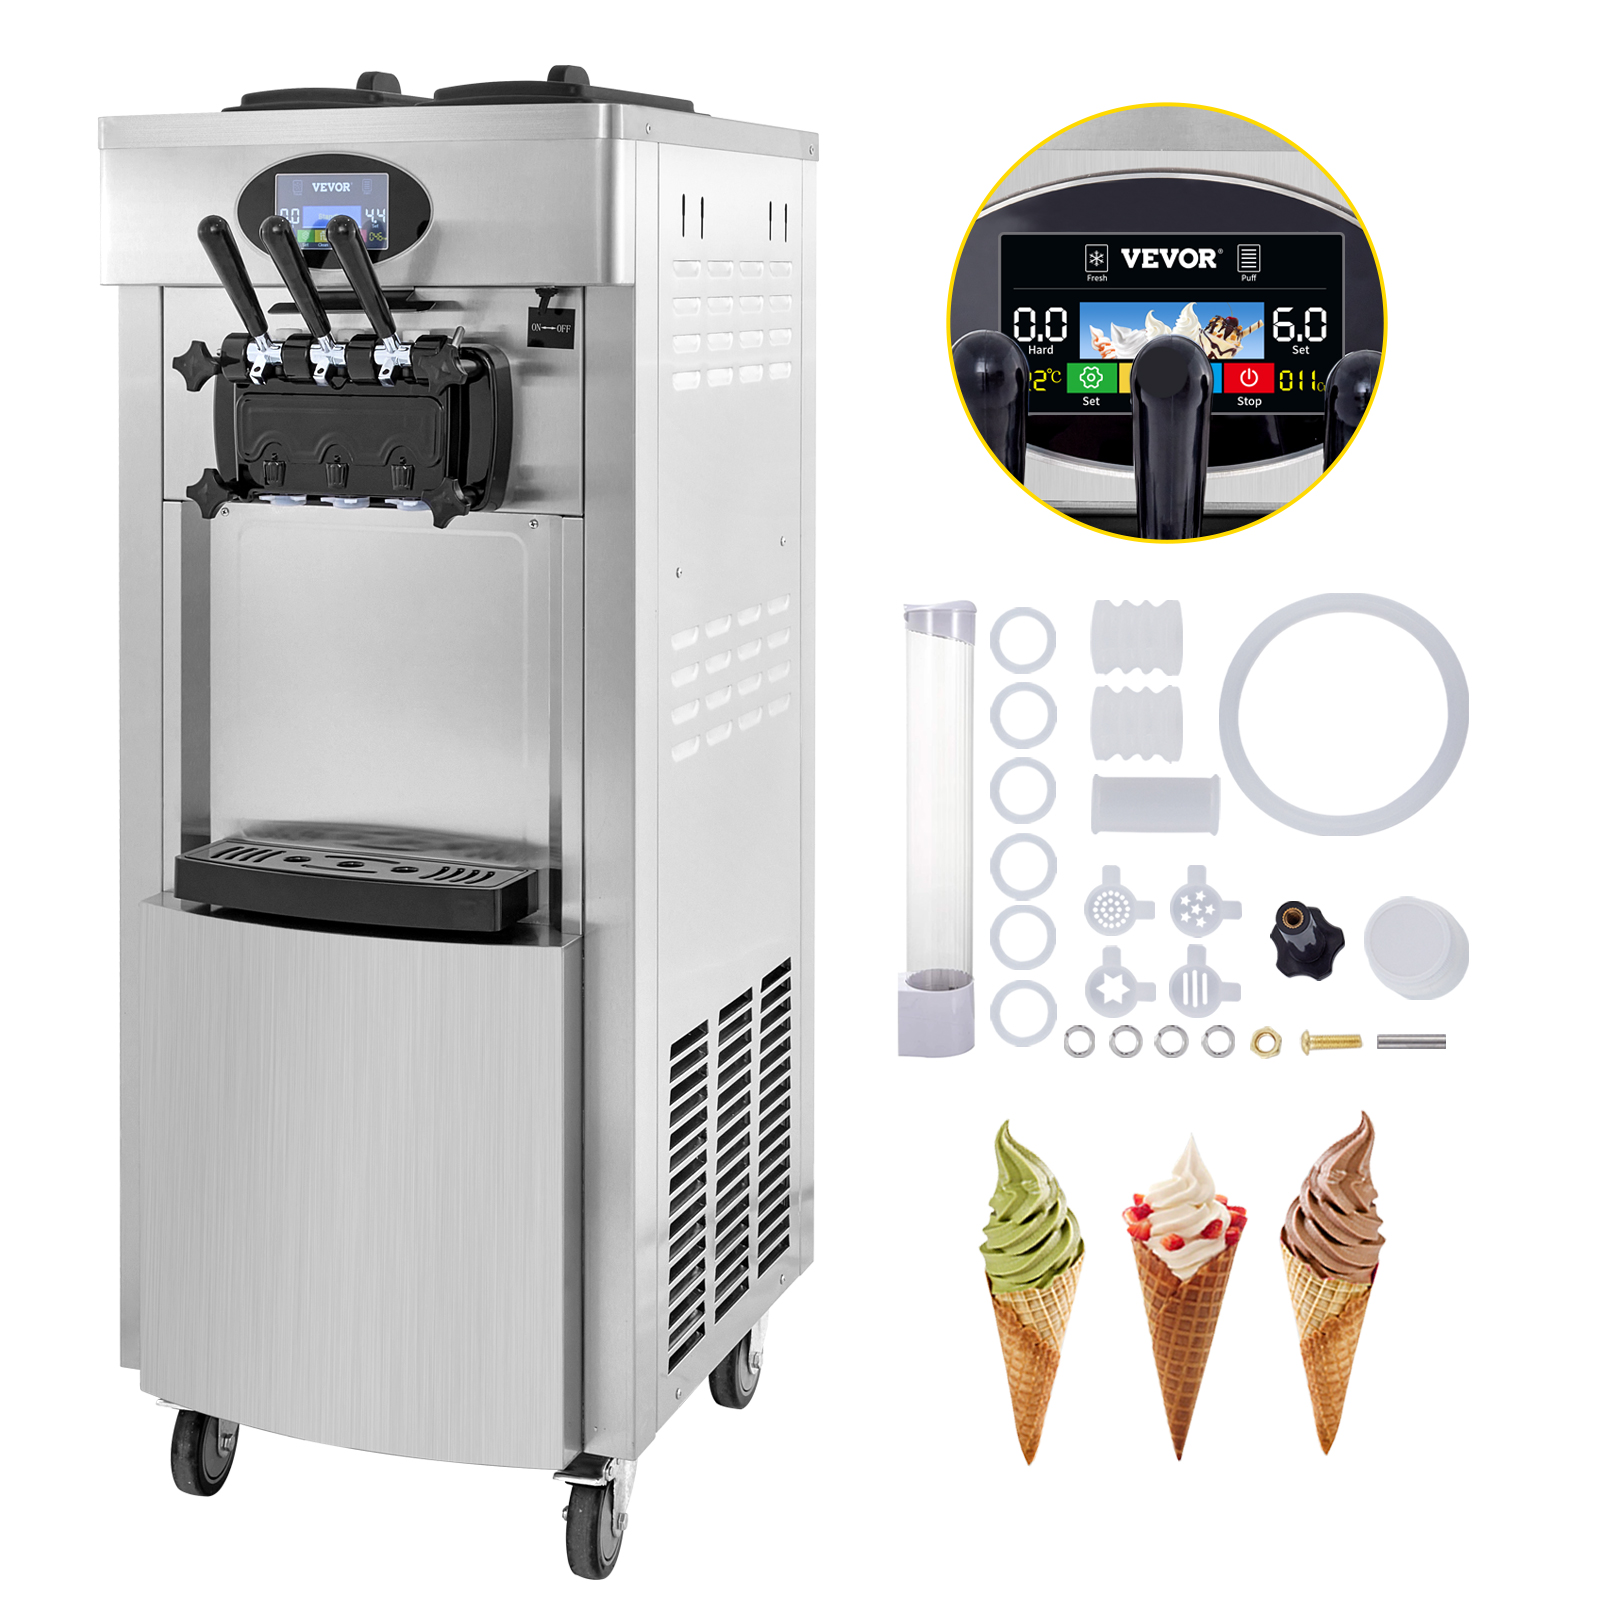 VEVOR 2200W Commercial Soft Ice Cream Machine 3 Flavors 5.3-7.4Gallons/H Pre-Cooling at Night Auto Clean LED Panel Perfect for Restaurants Snack Bar supermarkets 